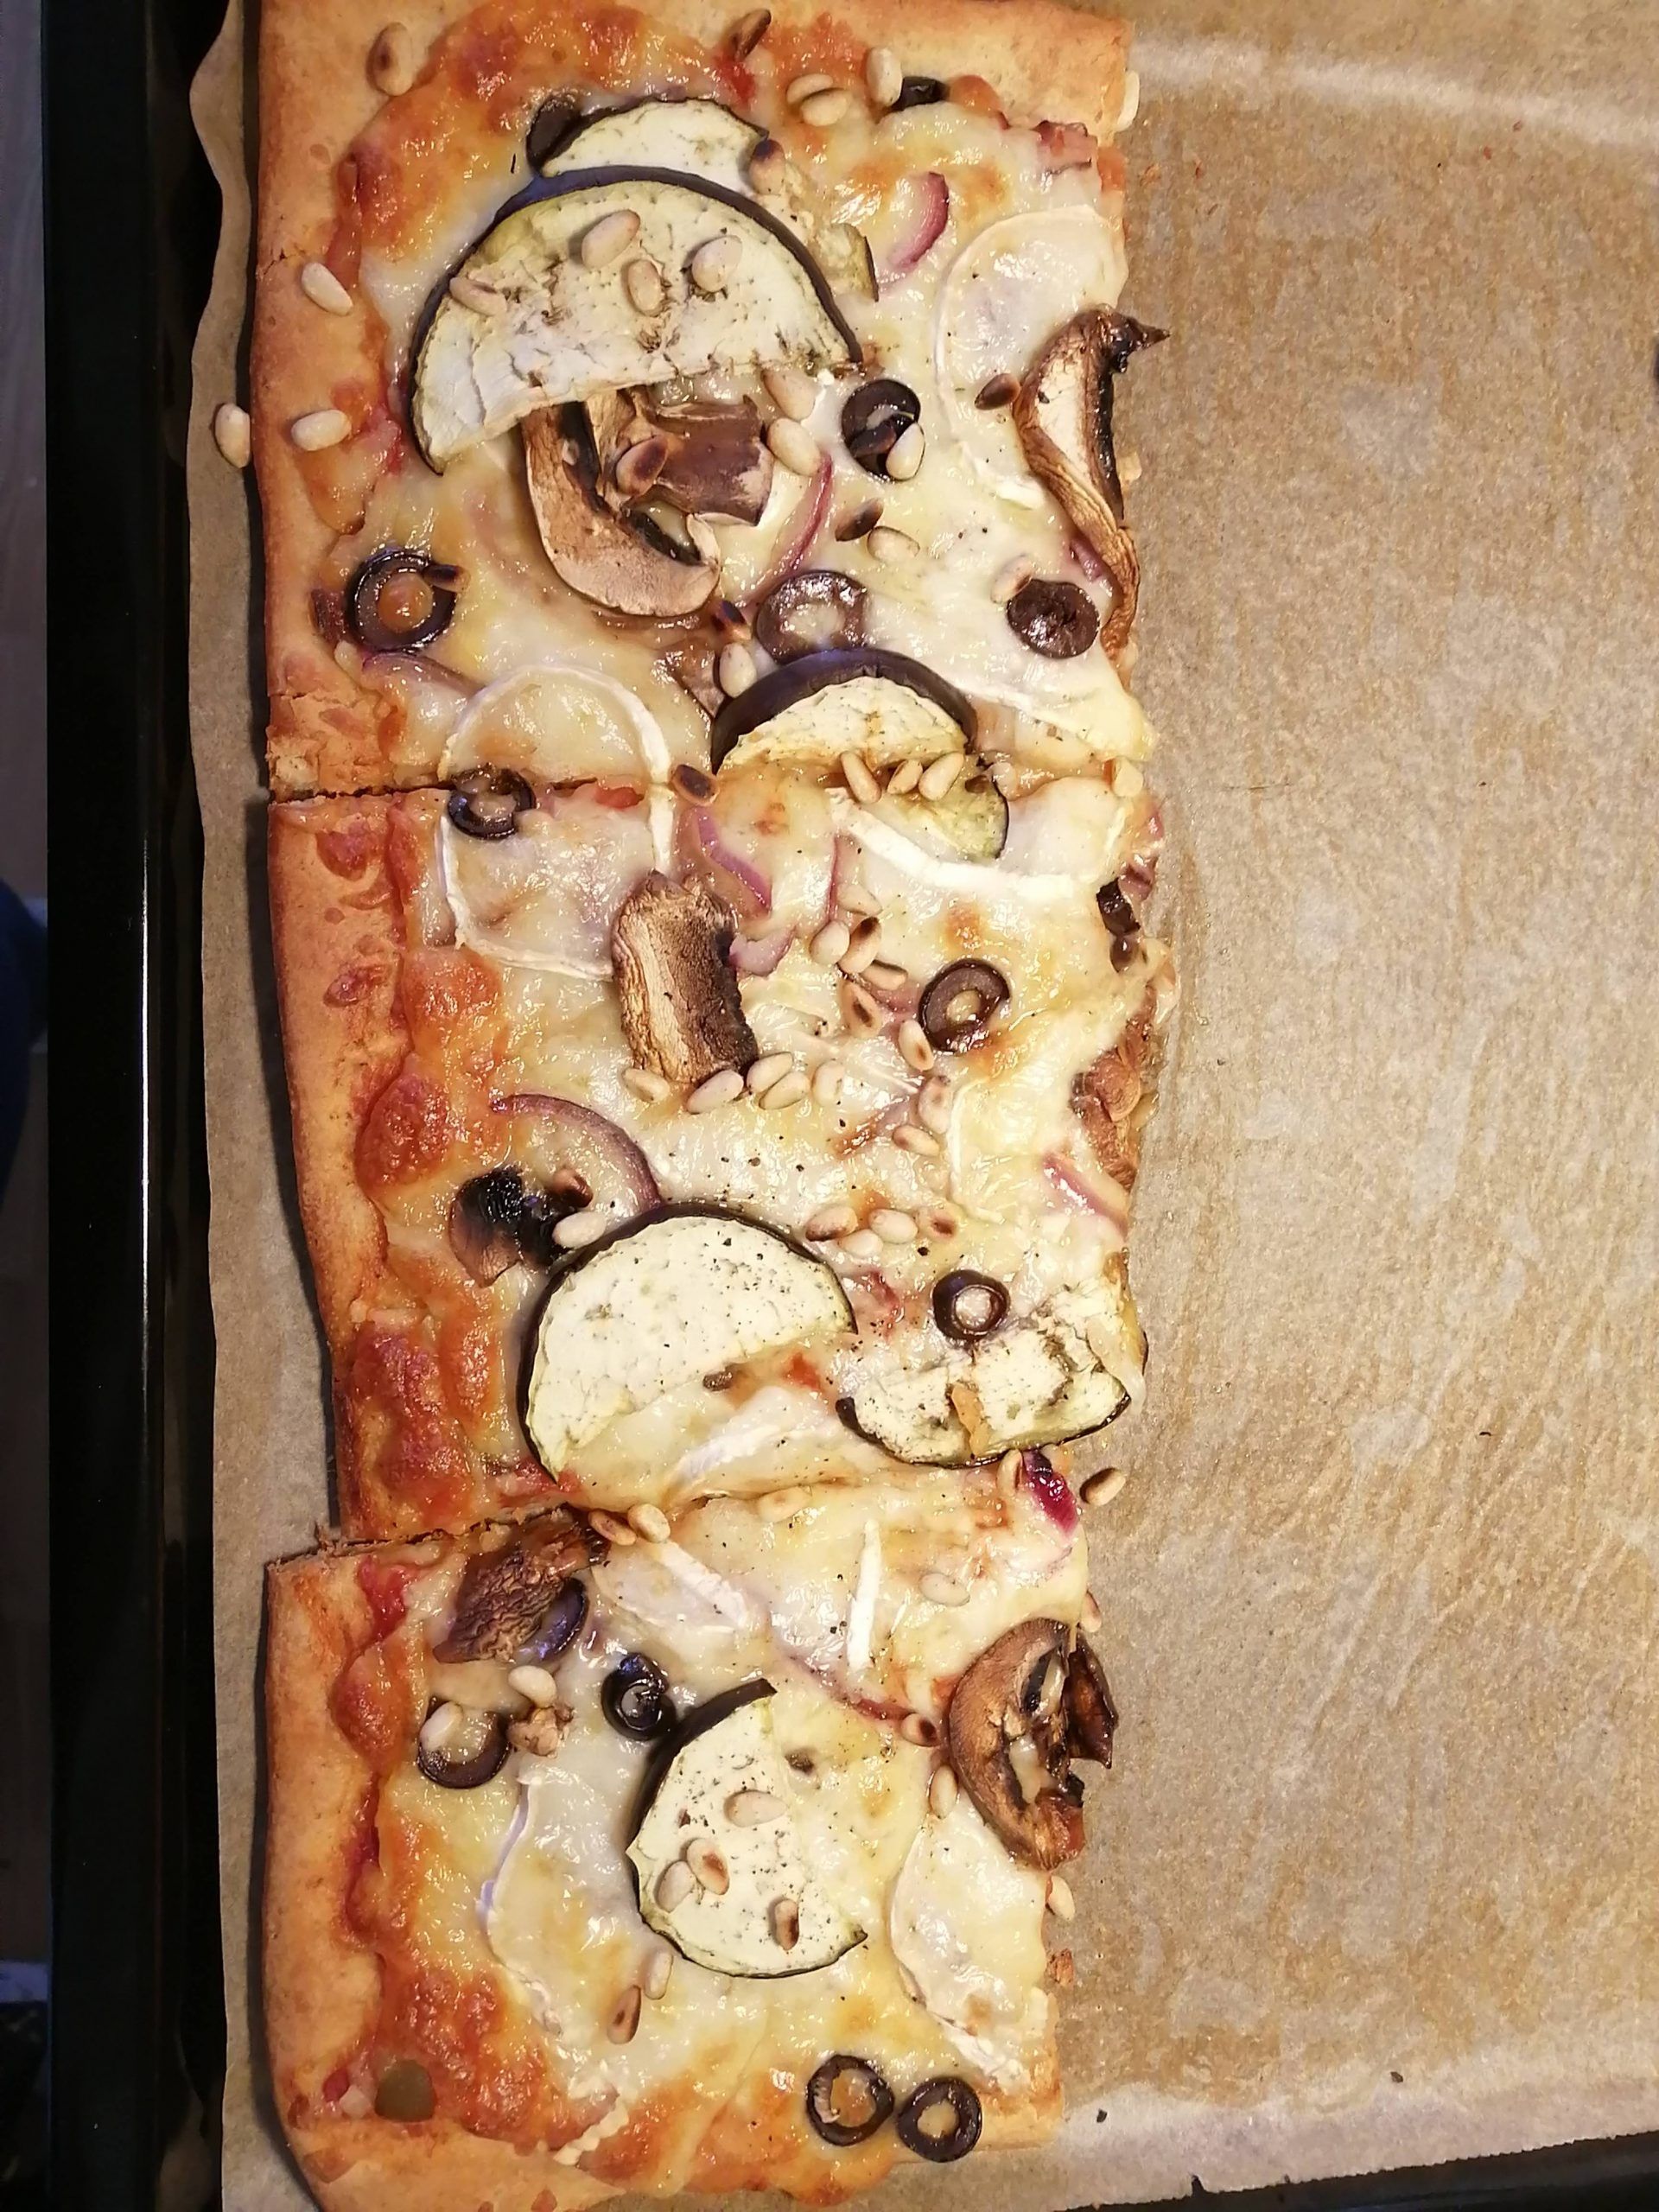 Leftover homemade pizza slices with eggplant, pine nute and red onion